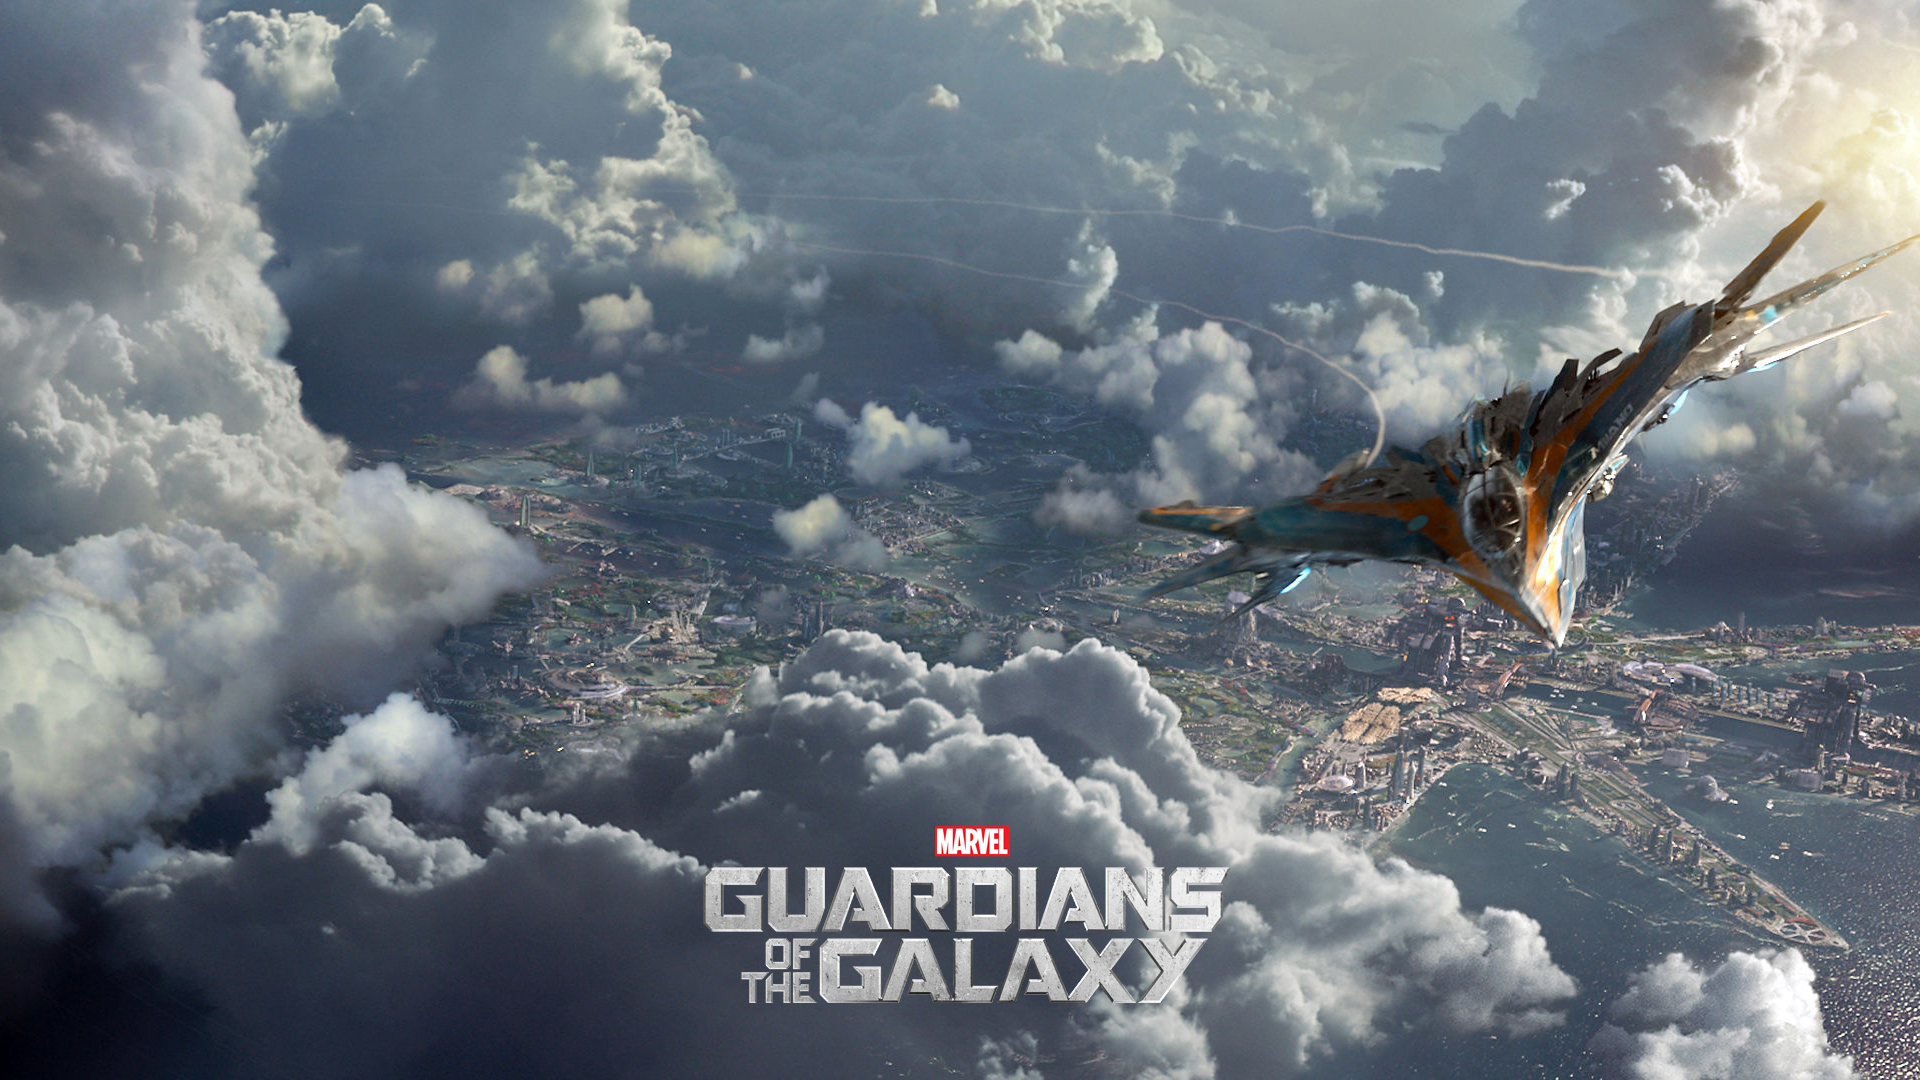 HD Guardians Of The Galaxy Aircraft Marvel Wallpaper Full Size ...